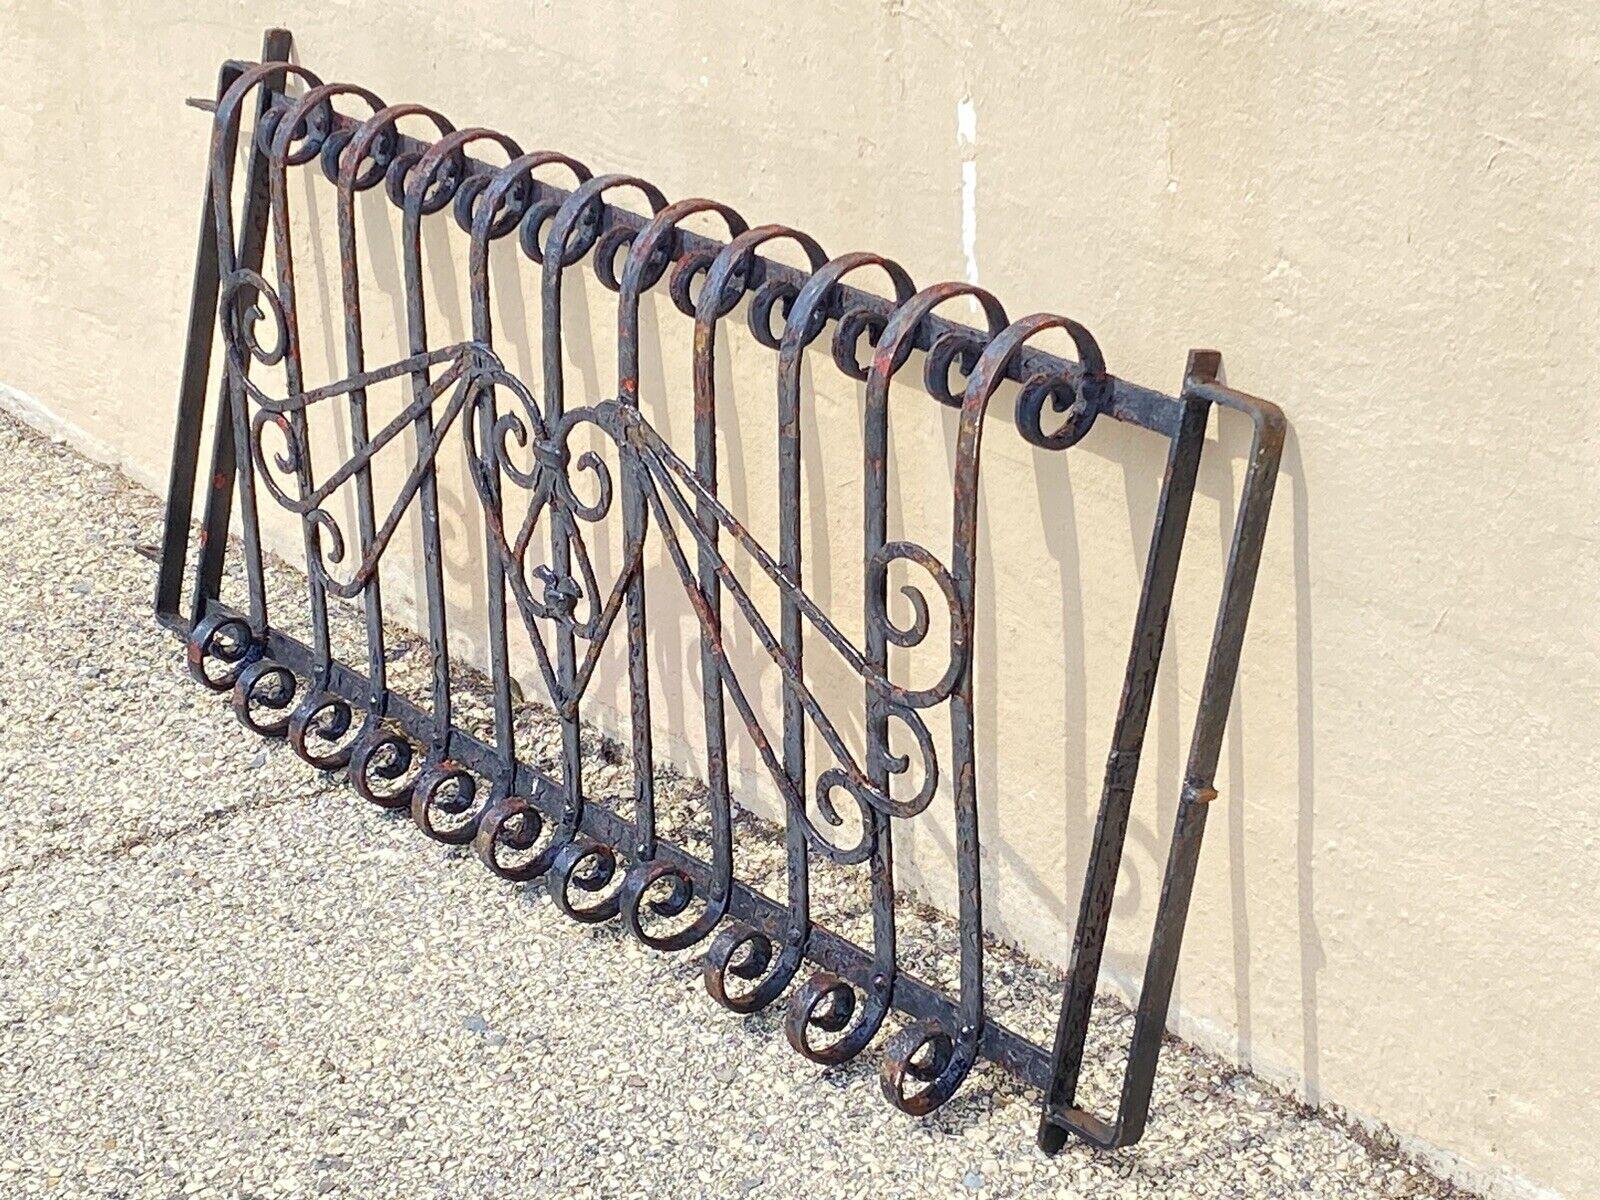 Antique Art Nouveau Black Wrought Iron Heart and Scroll 23x52 Garden Fence Gate. Item features wrought iron construction, distressed red painted accents, remarkable heart and scroll work design, very nice antique item, great style and form. Circa